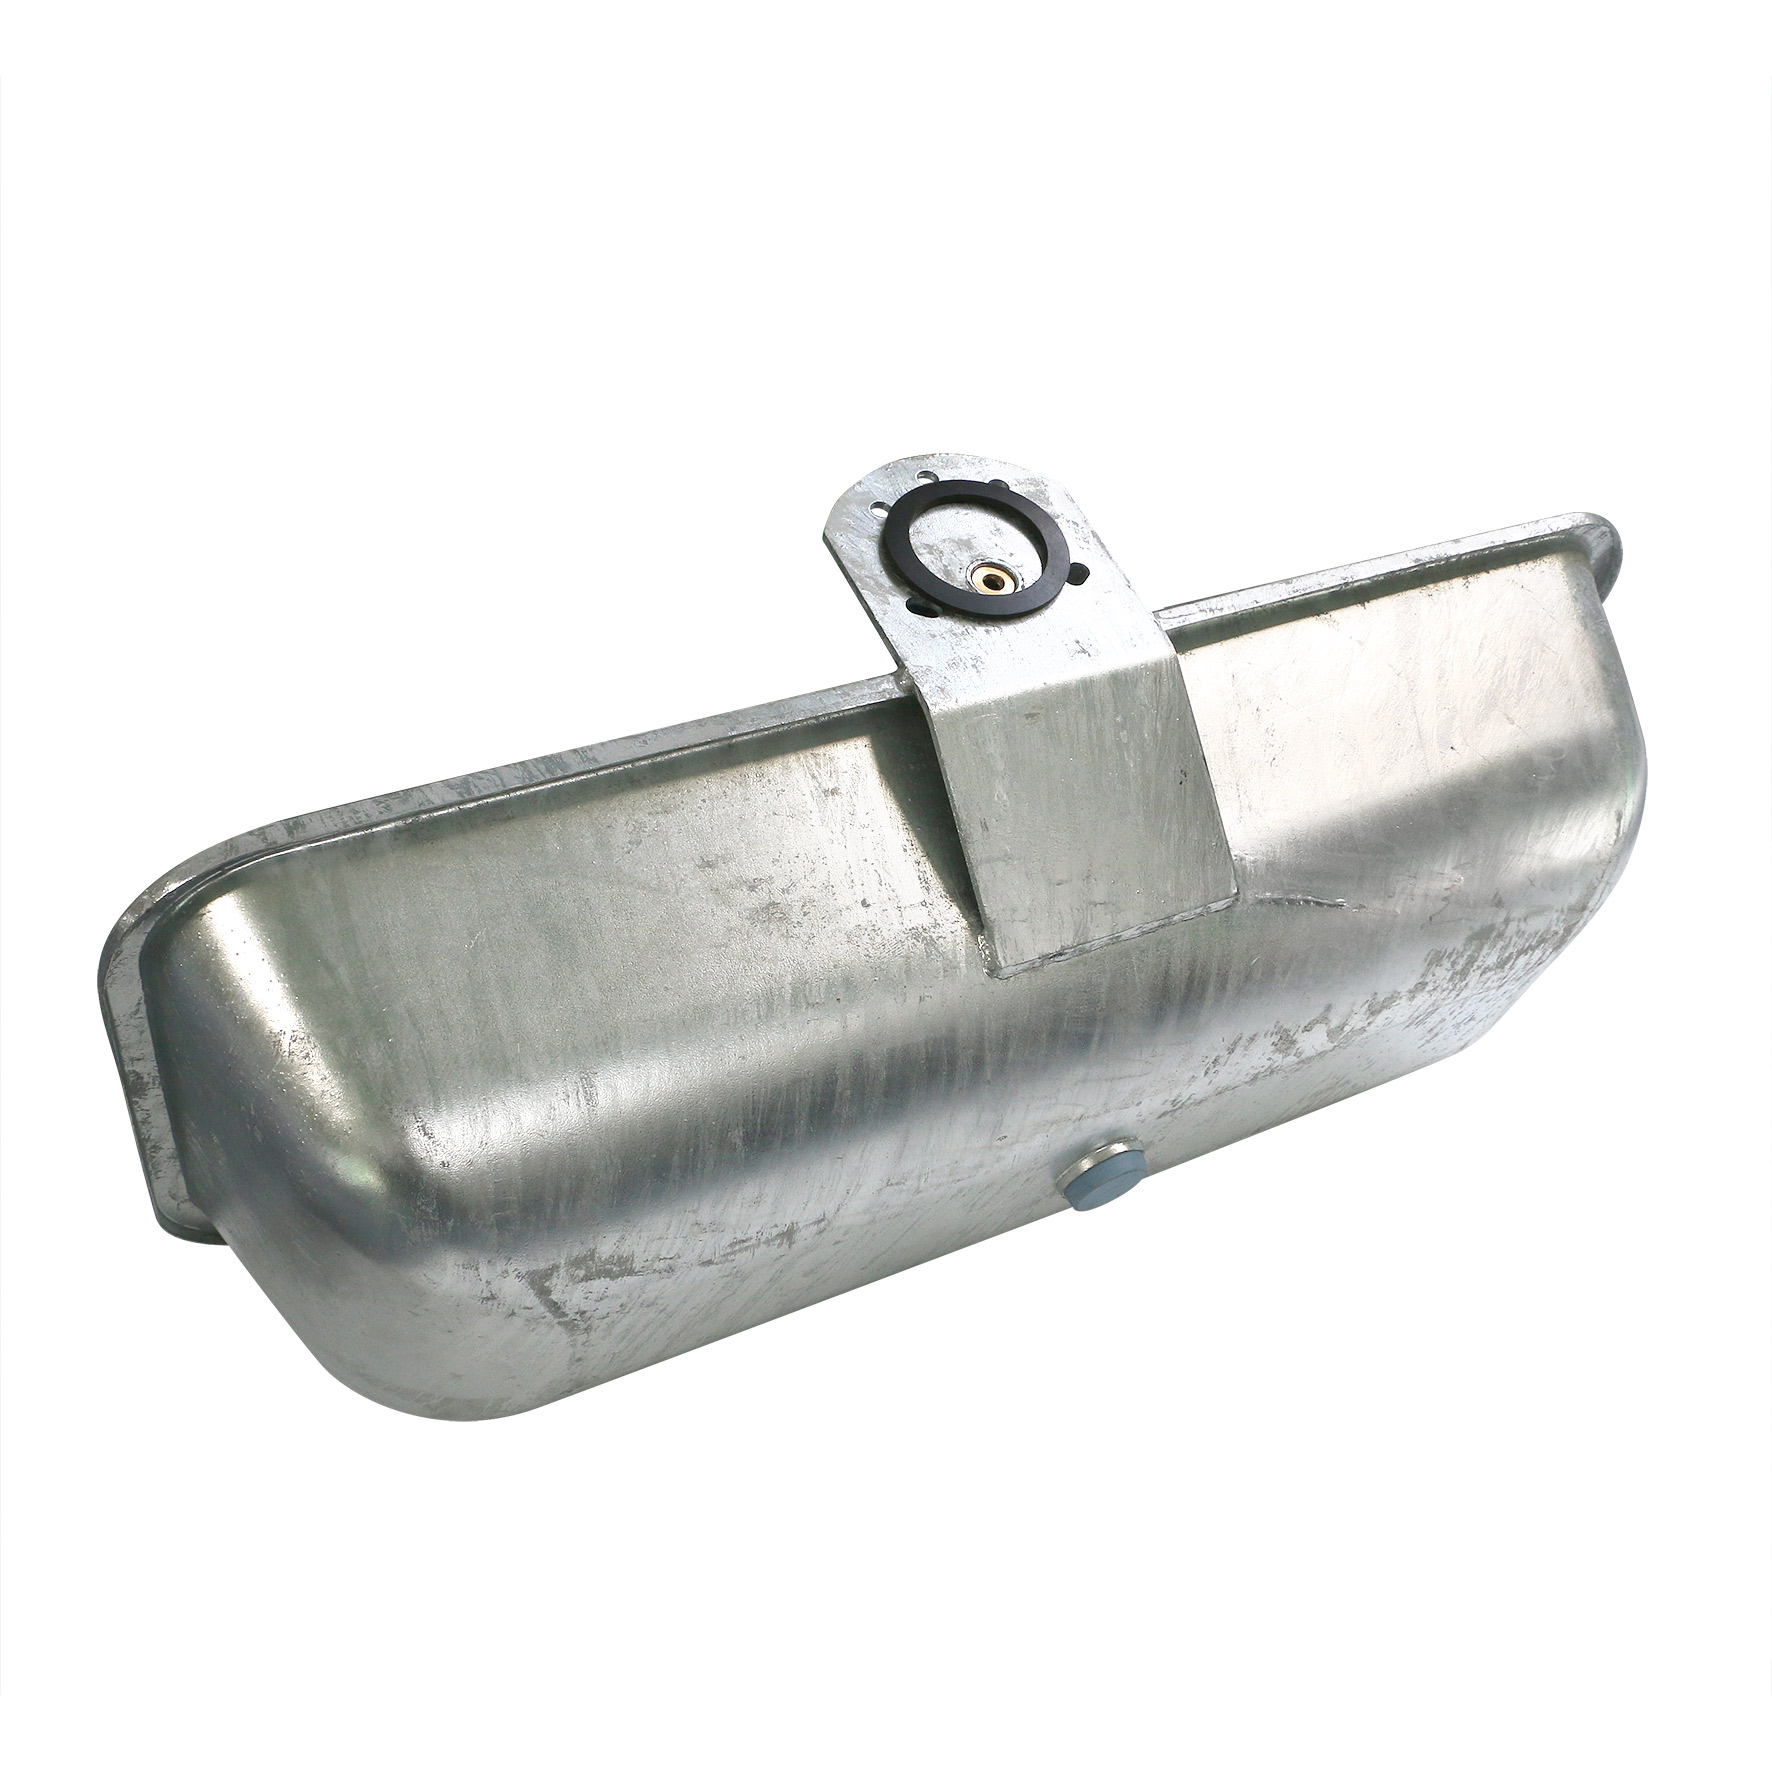 GALVALAC 65T Drinking Trough for Tank